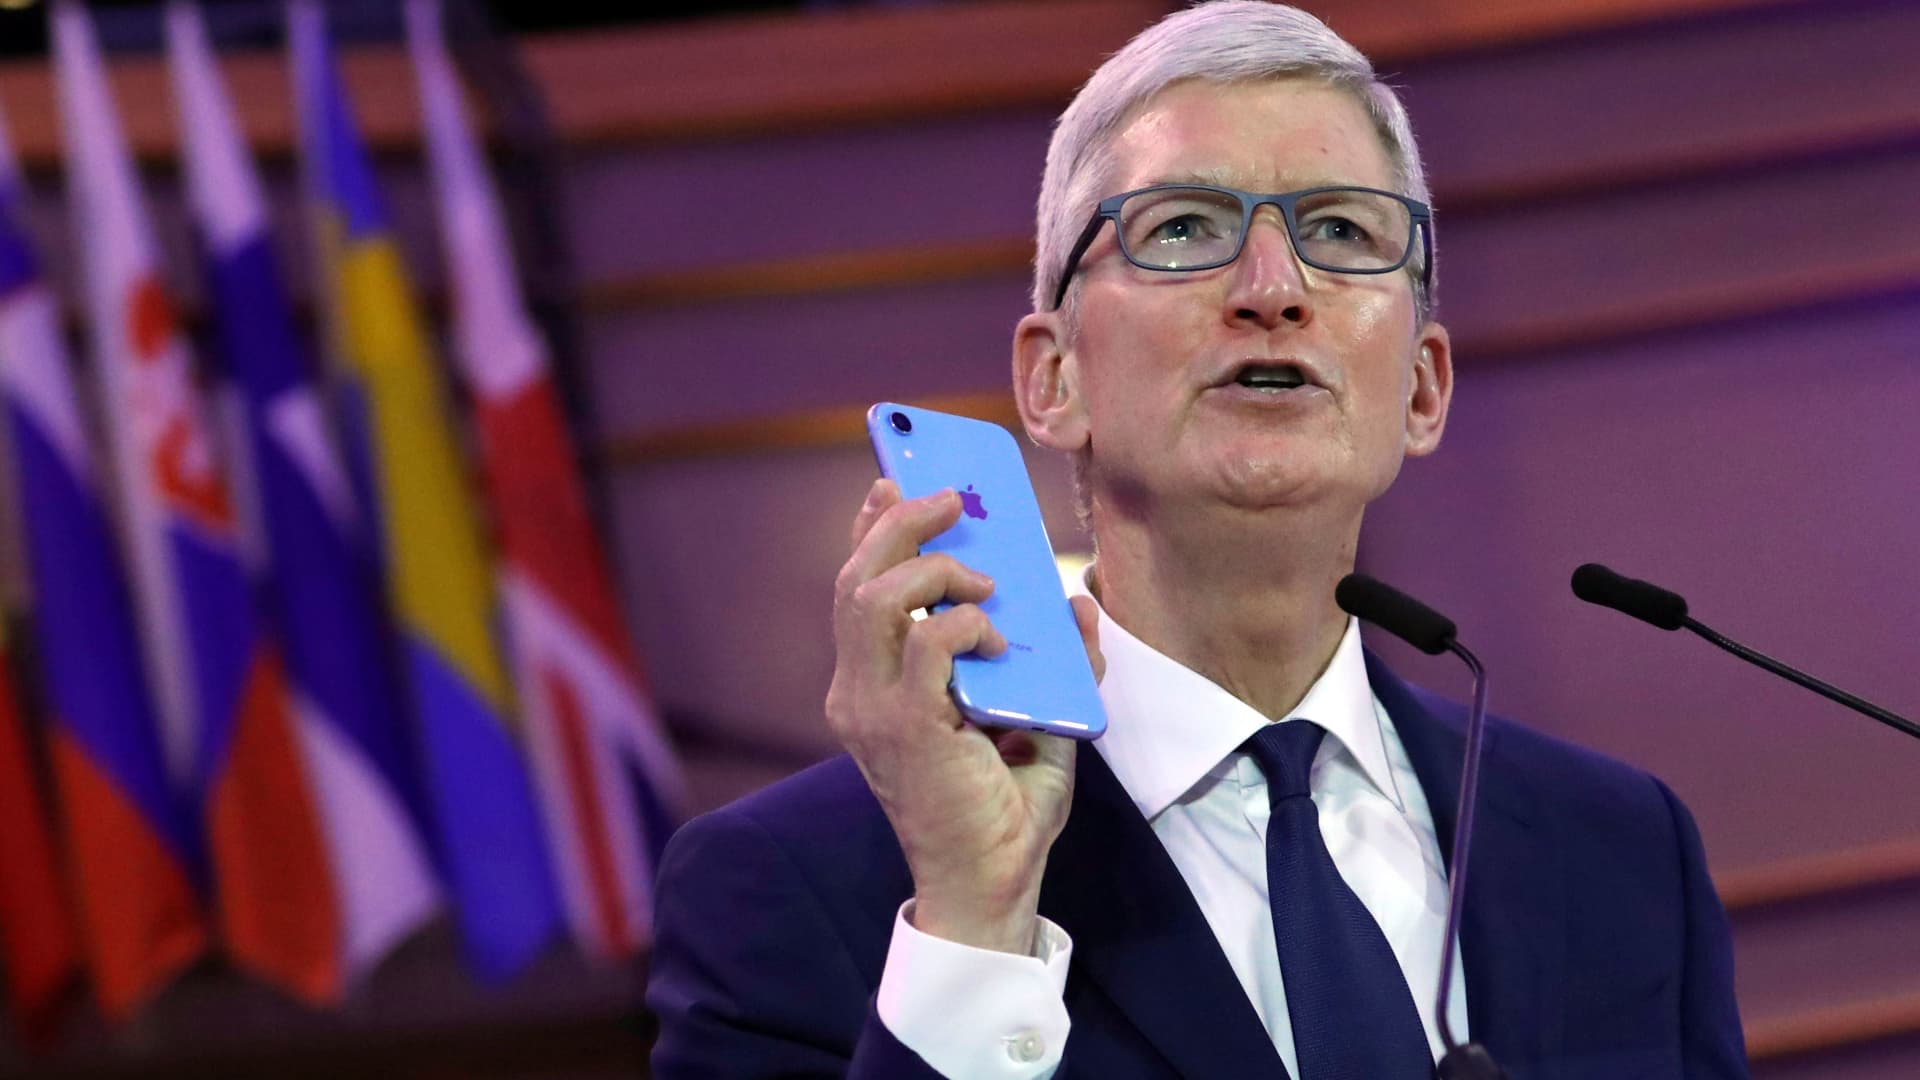 Apple CEO Tim Cook delivers a keynote during the European Union's privacy conference at the EU Parliament in Brussels, Belgium October 24, 2018.